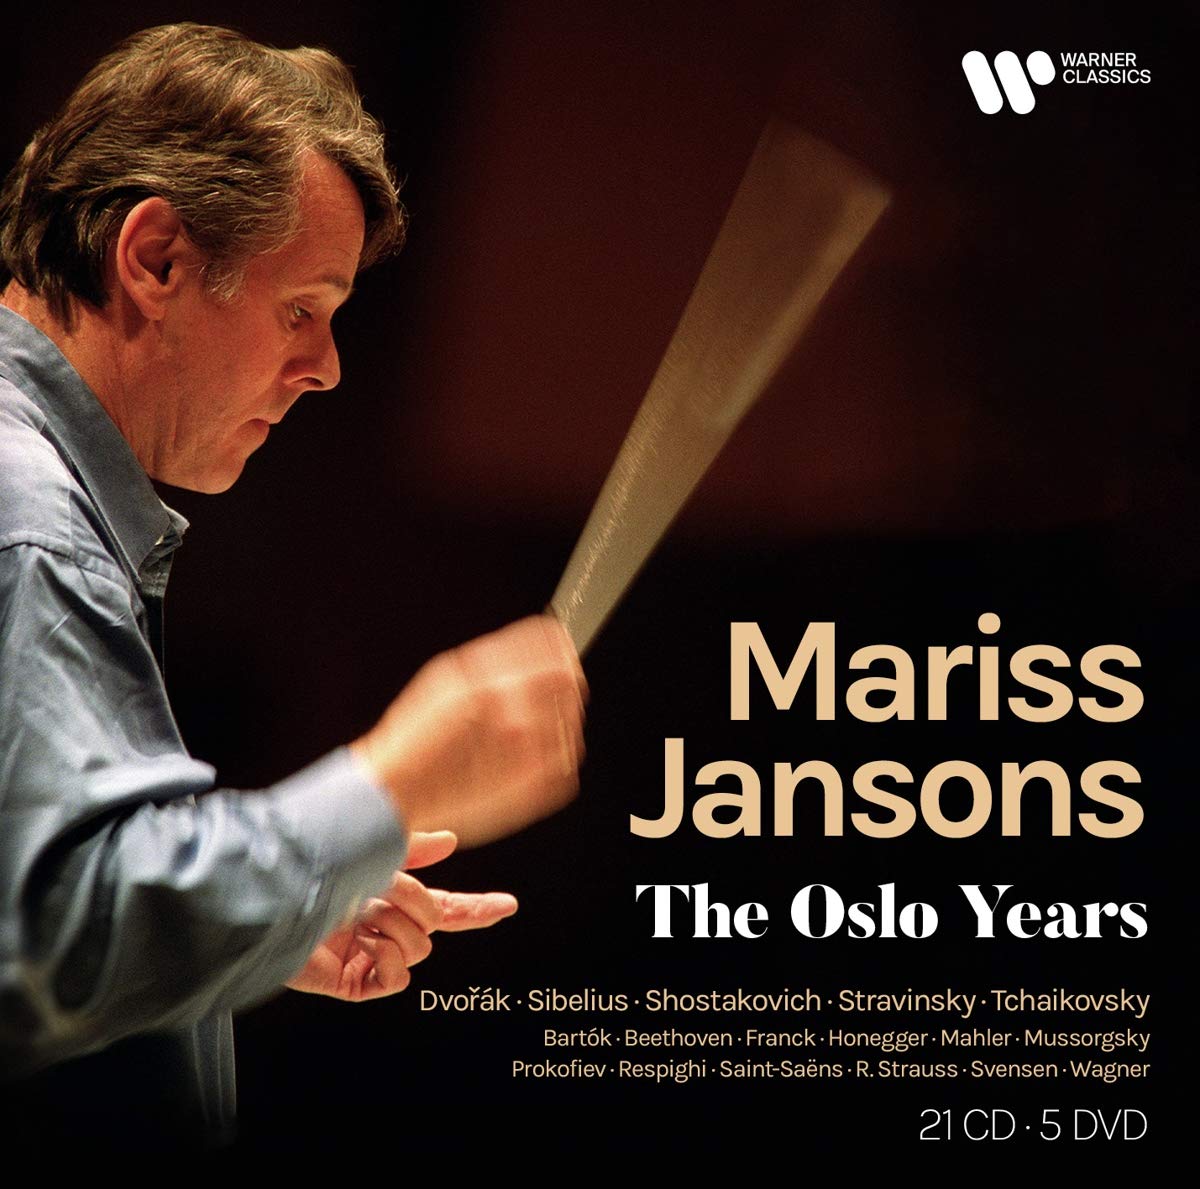 MARISS JANSONS - THE OSLO YEARS (26 CDS + 5 DVDS)